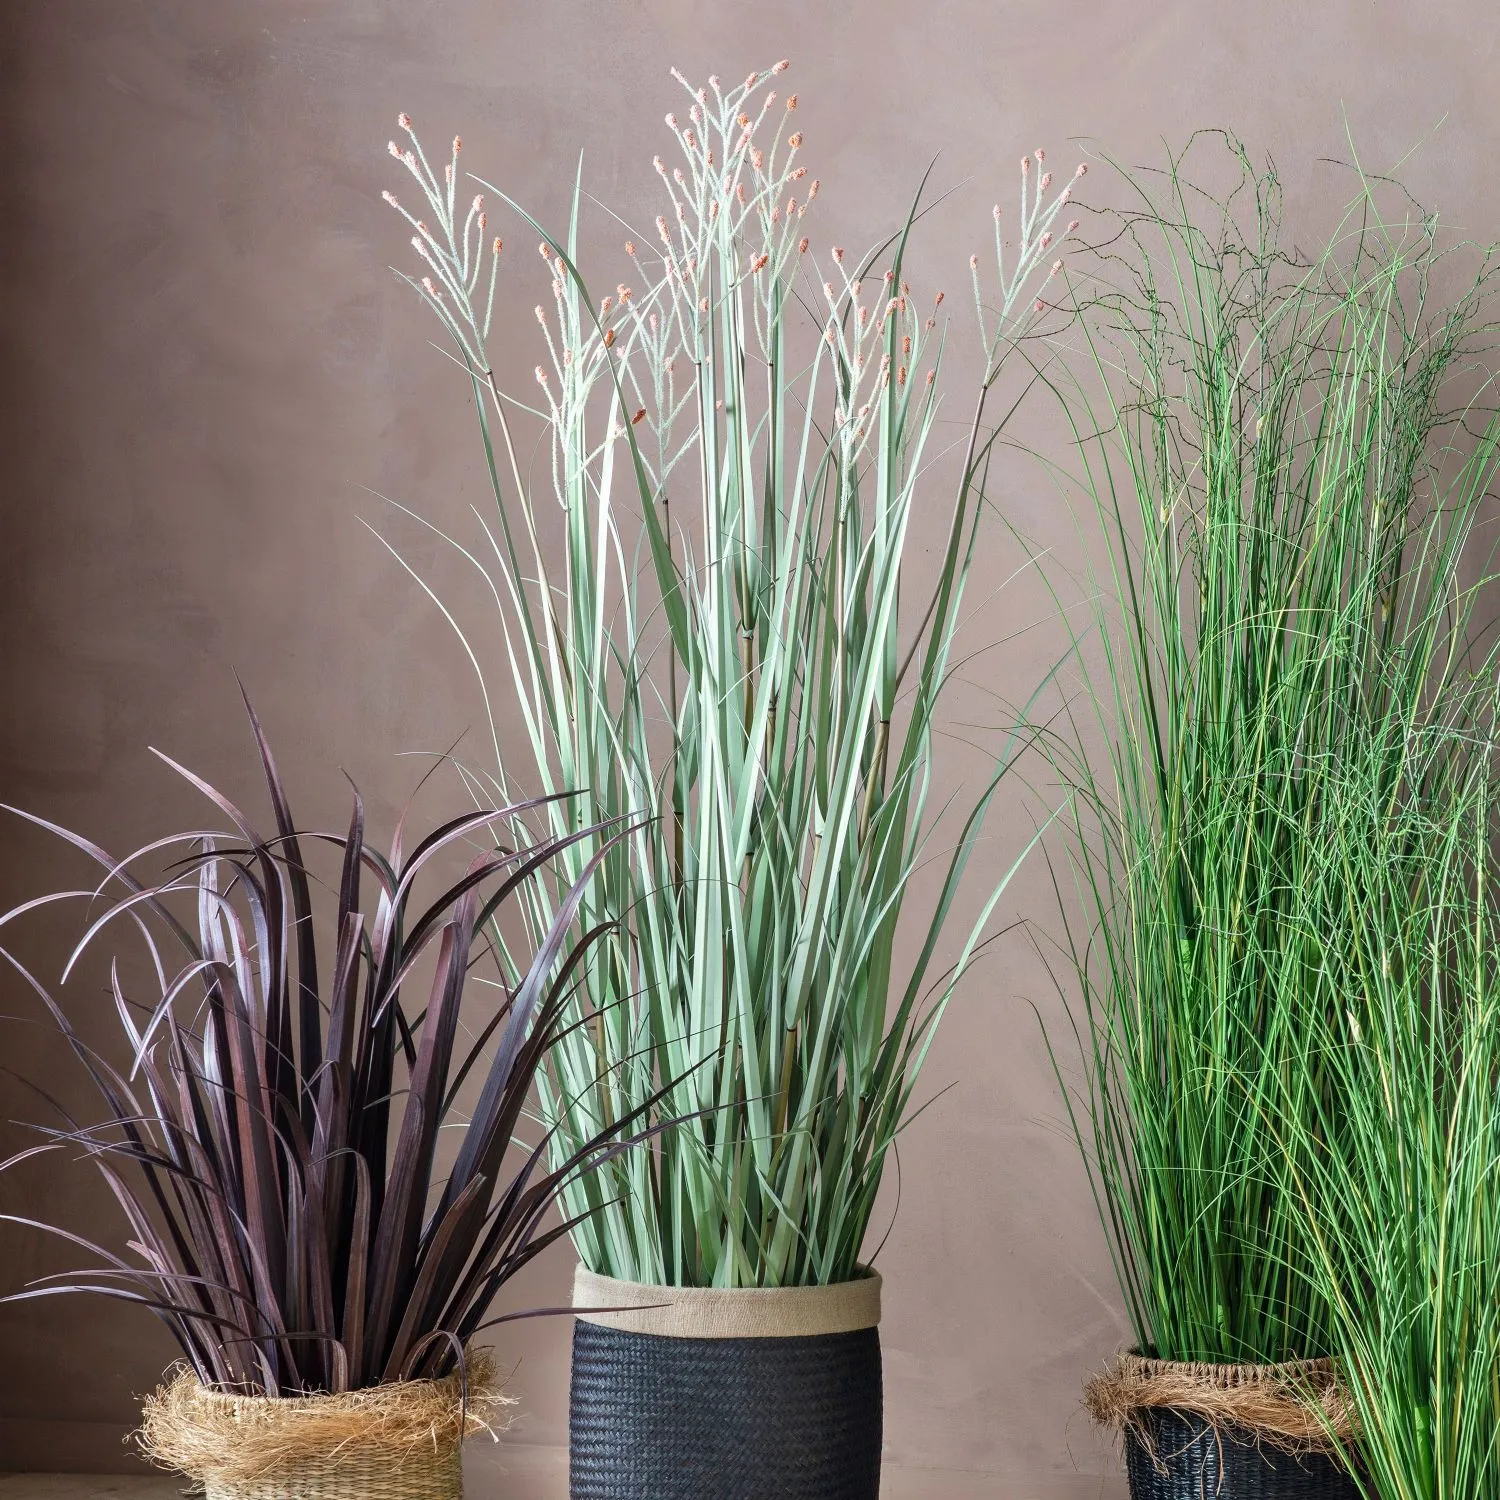 Realistic Three Headed Green Russet Grass Artificial Plant